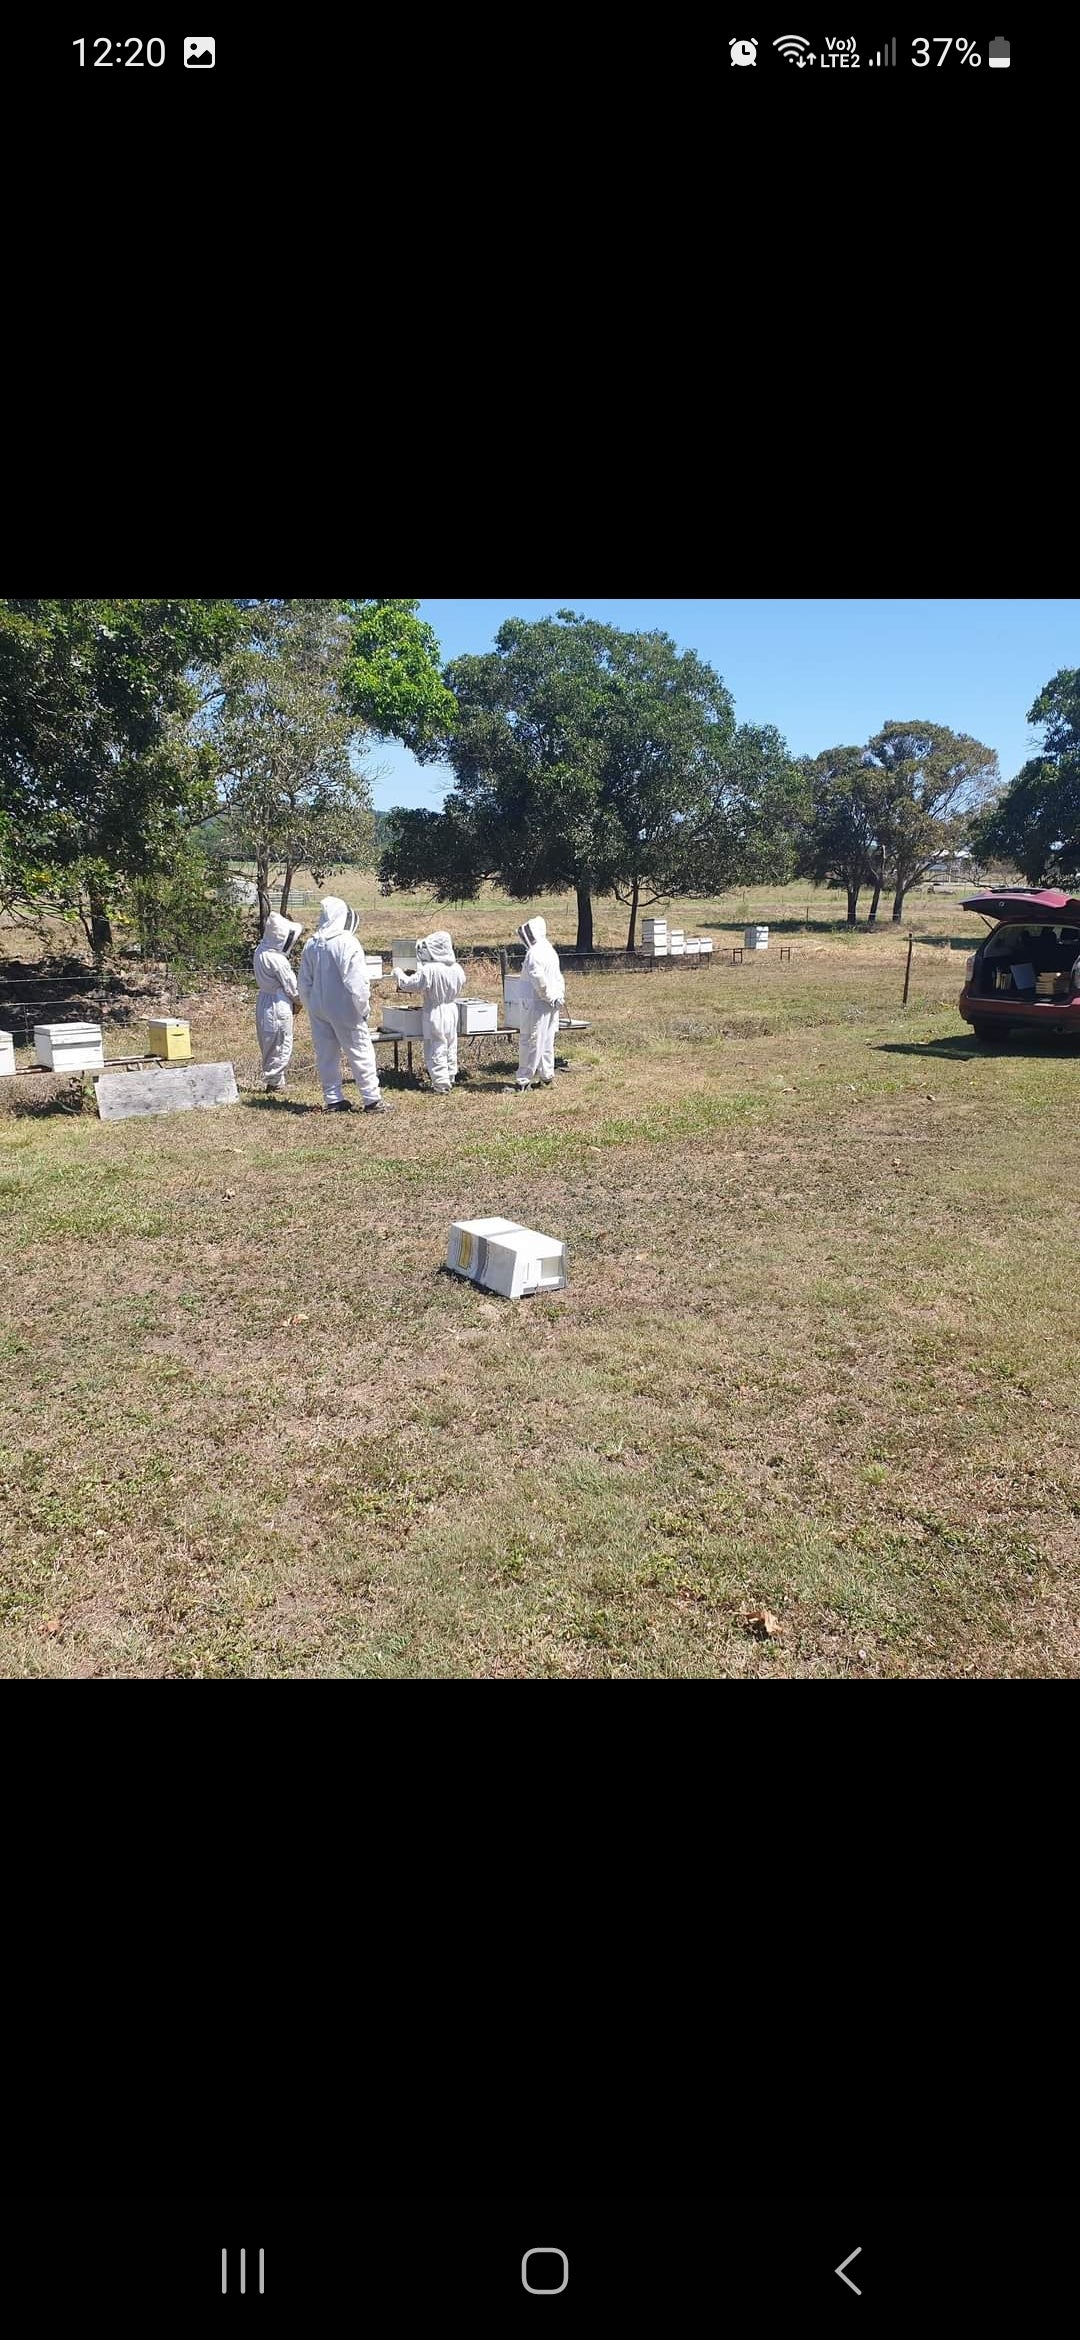 Hands On Beekeeping Training On Site - Bees